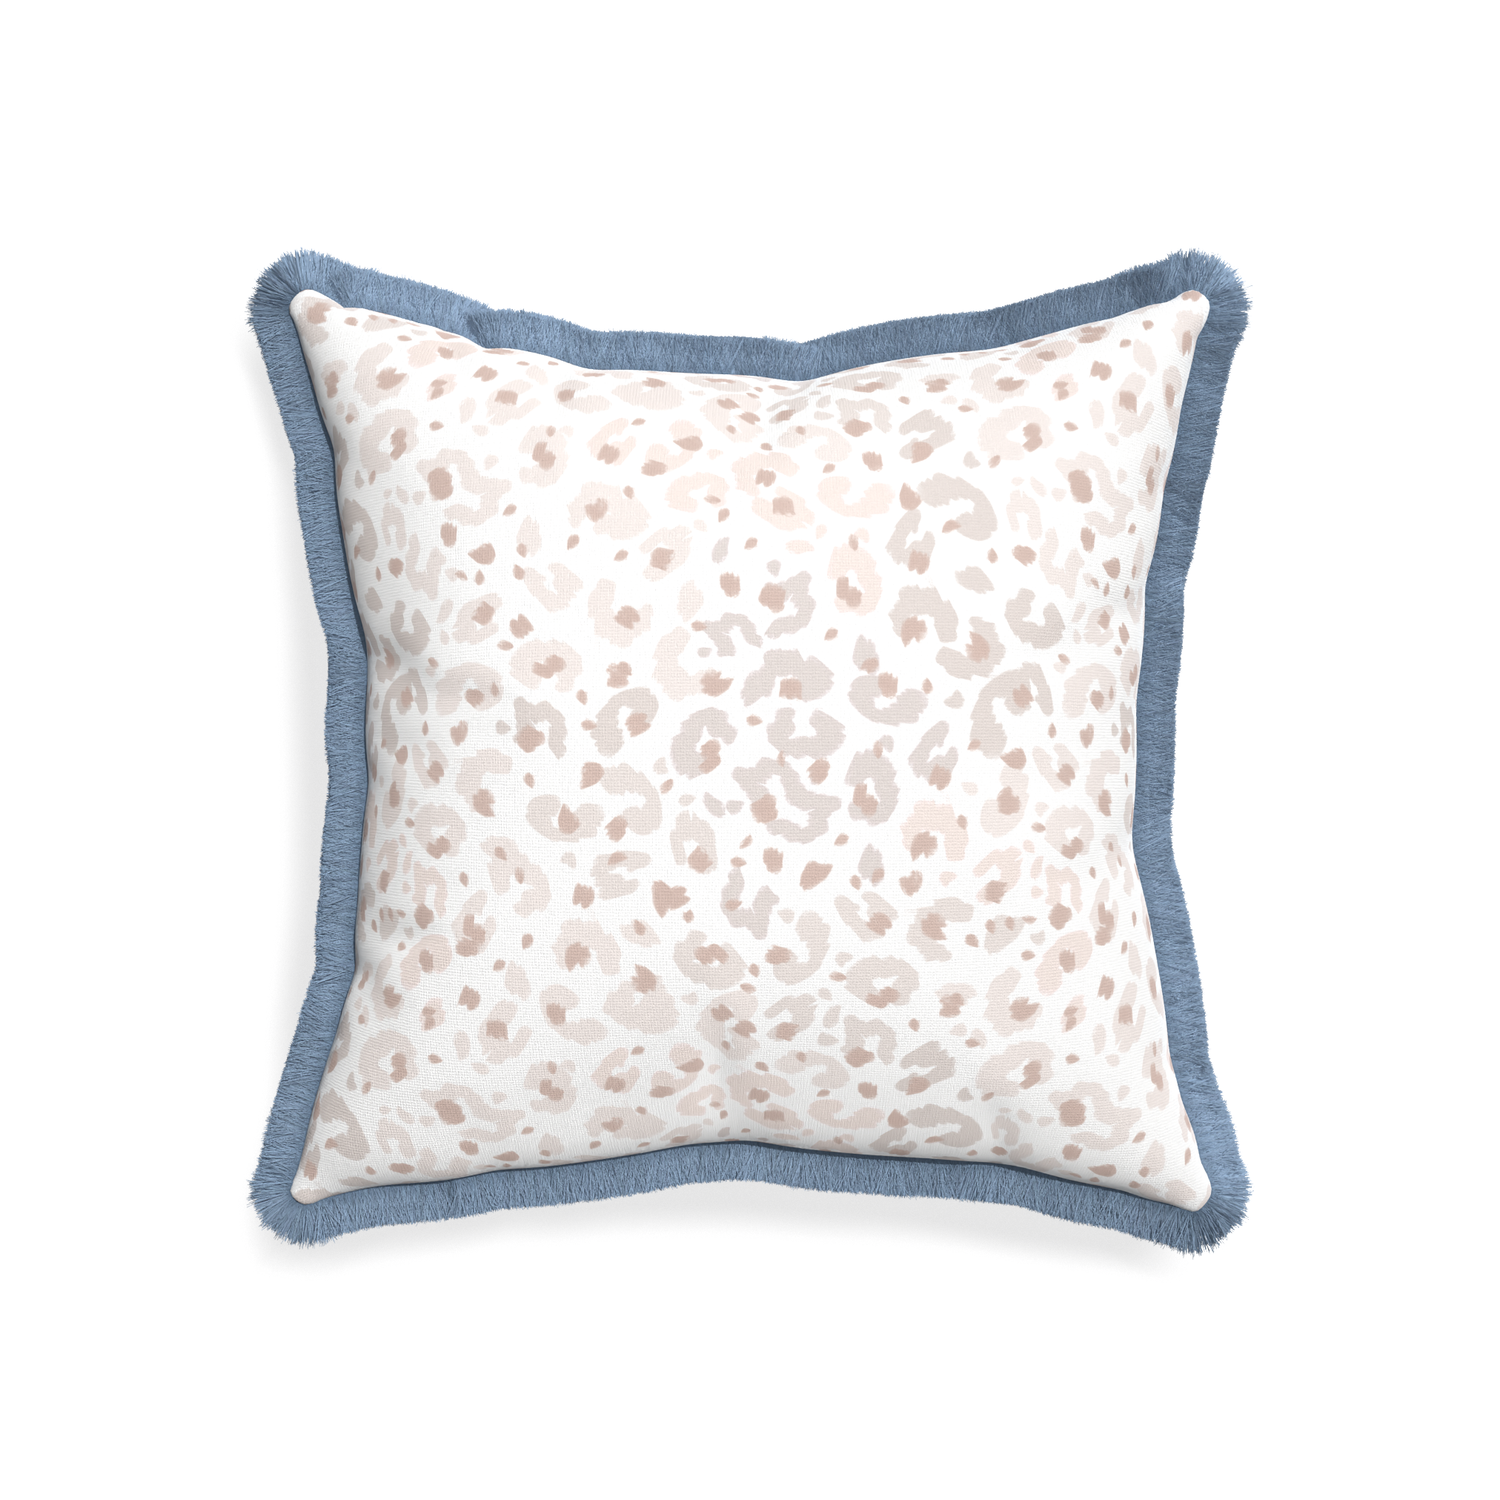 20-square rosie custom pillow with sky fringe on white background